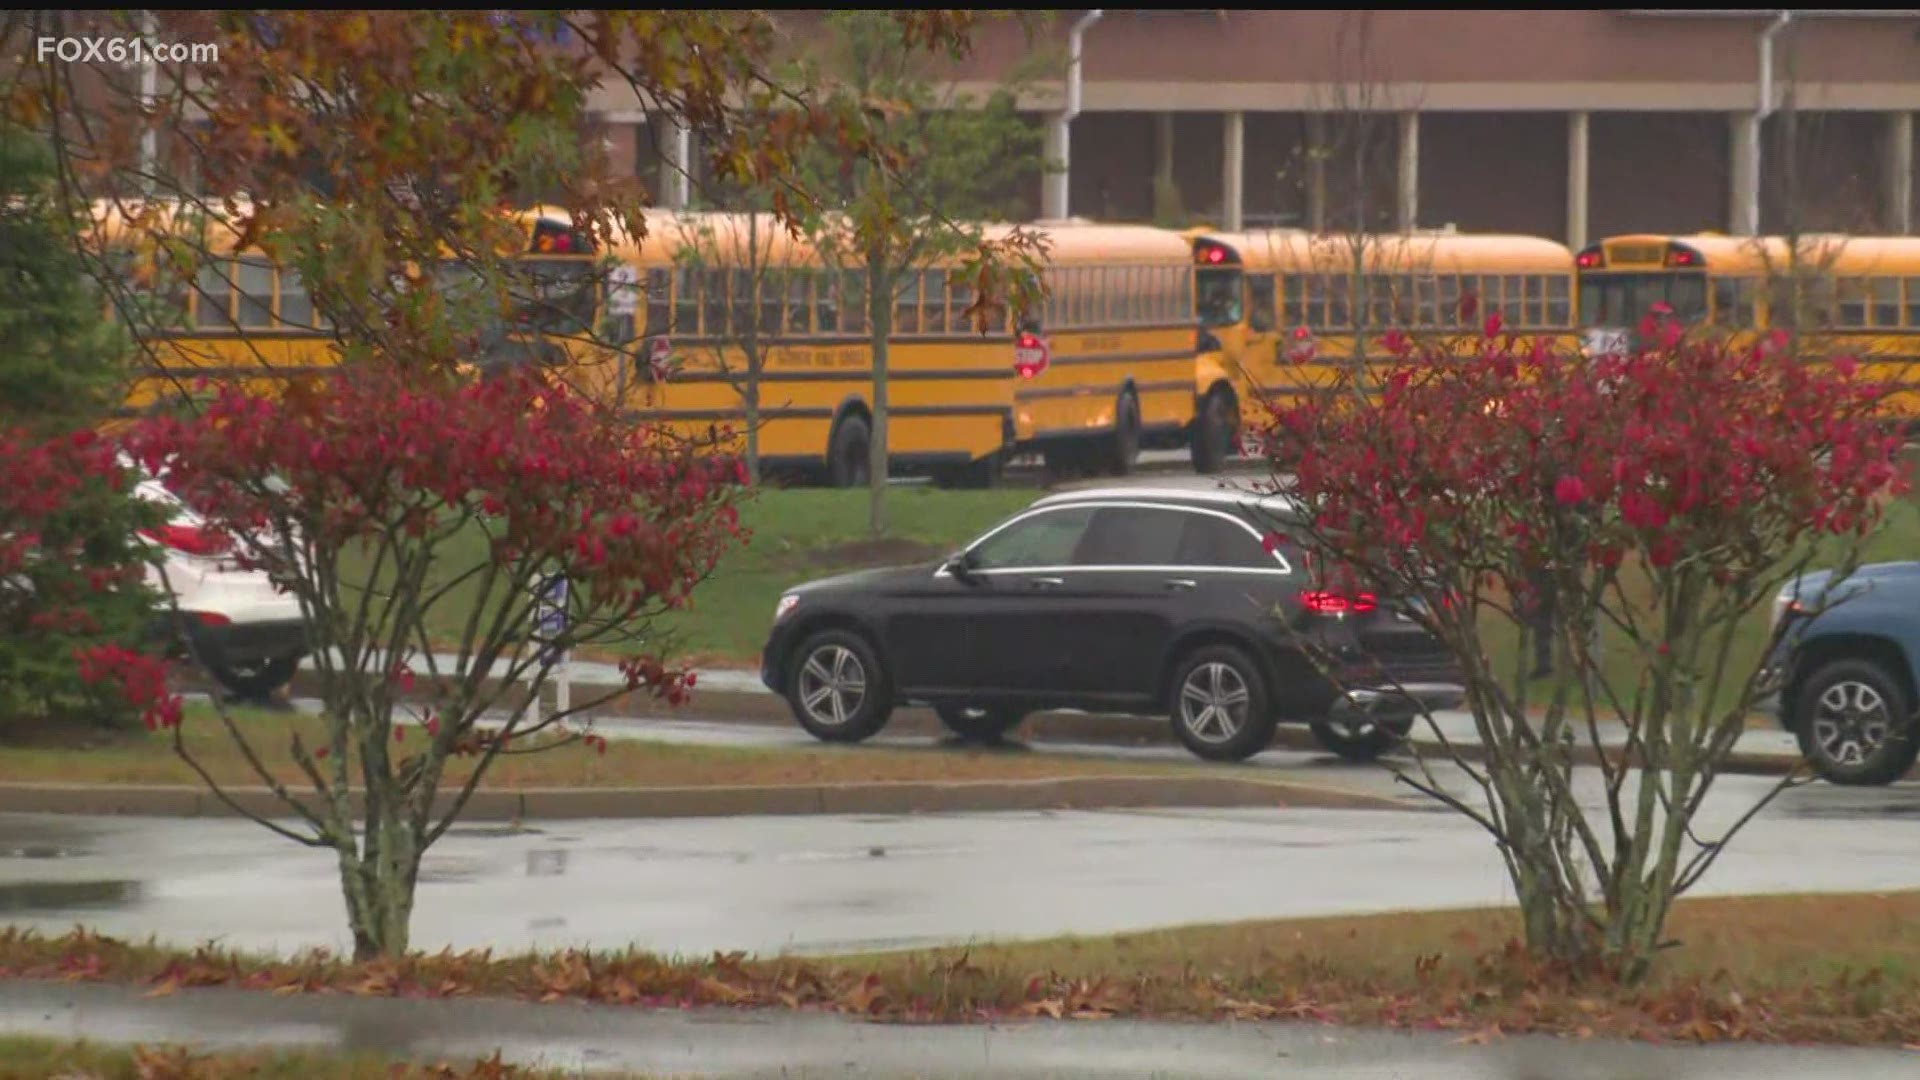 According to Waterford PD, the high school received a call indicating a threat